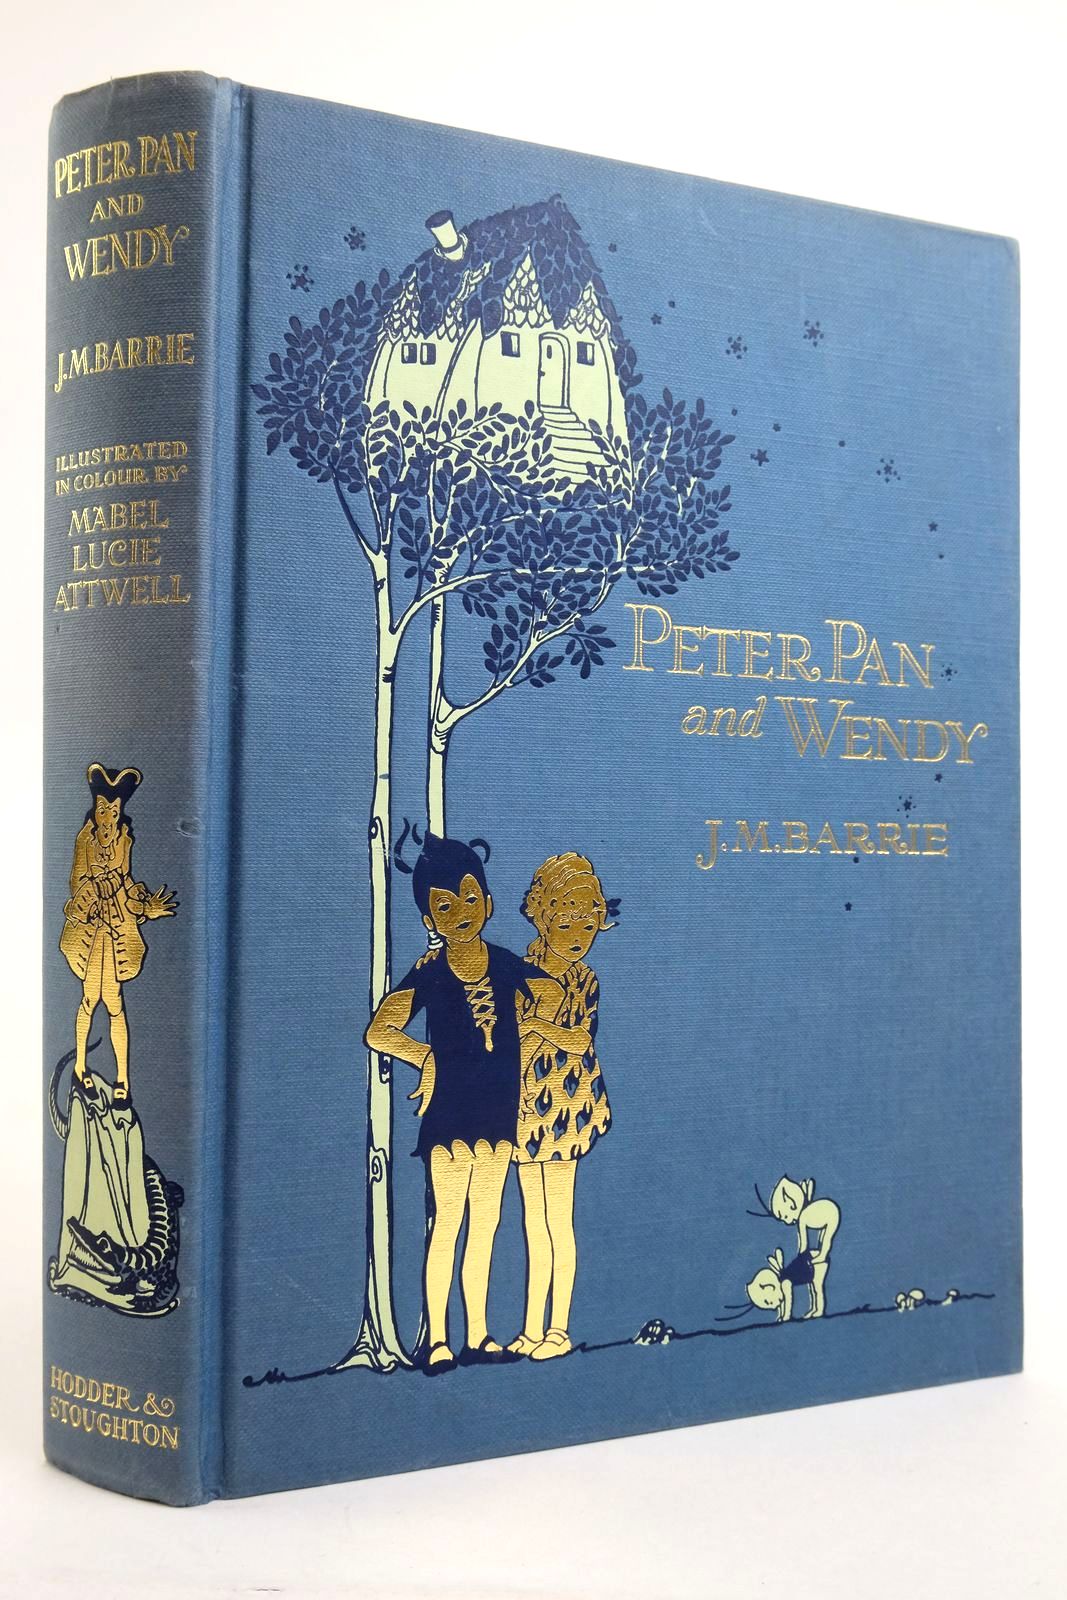 Photo of PETER PAN AND WENDY written by Barrie, J.M. illustrated by Attwell, Mabel Lucie published by Hodder & Stoughton (STOCK CODE: 2135932)  for sale by Stella & Rose's Books